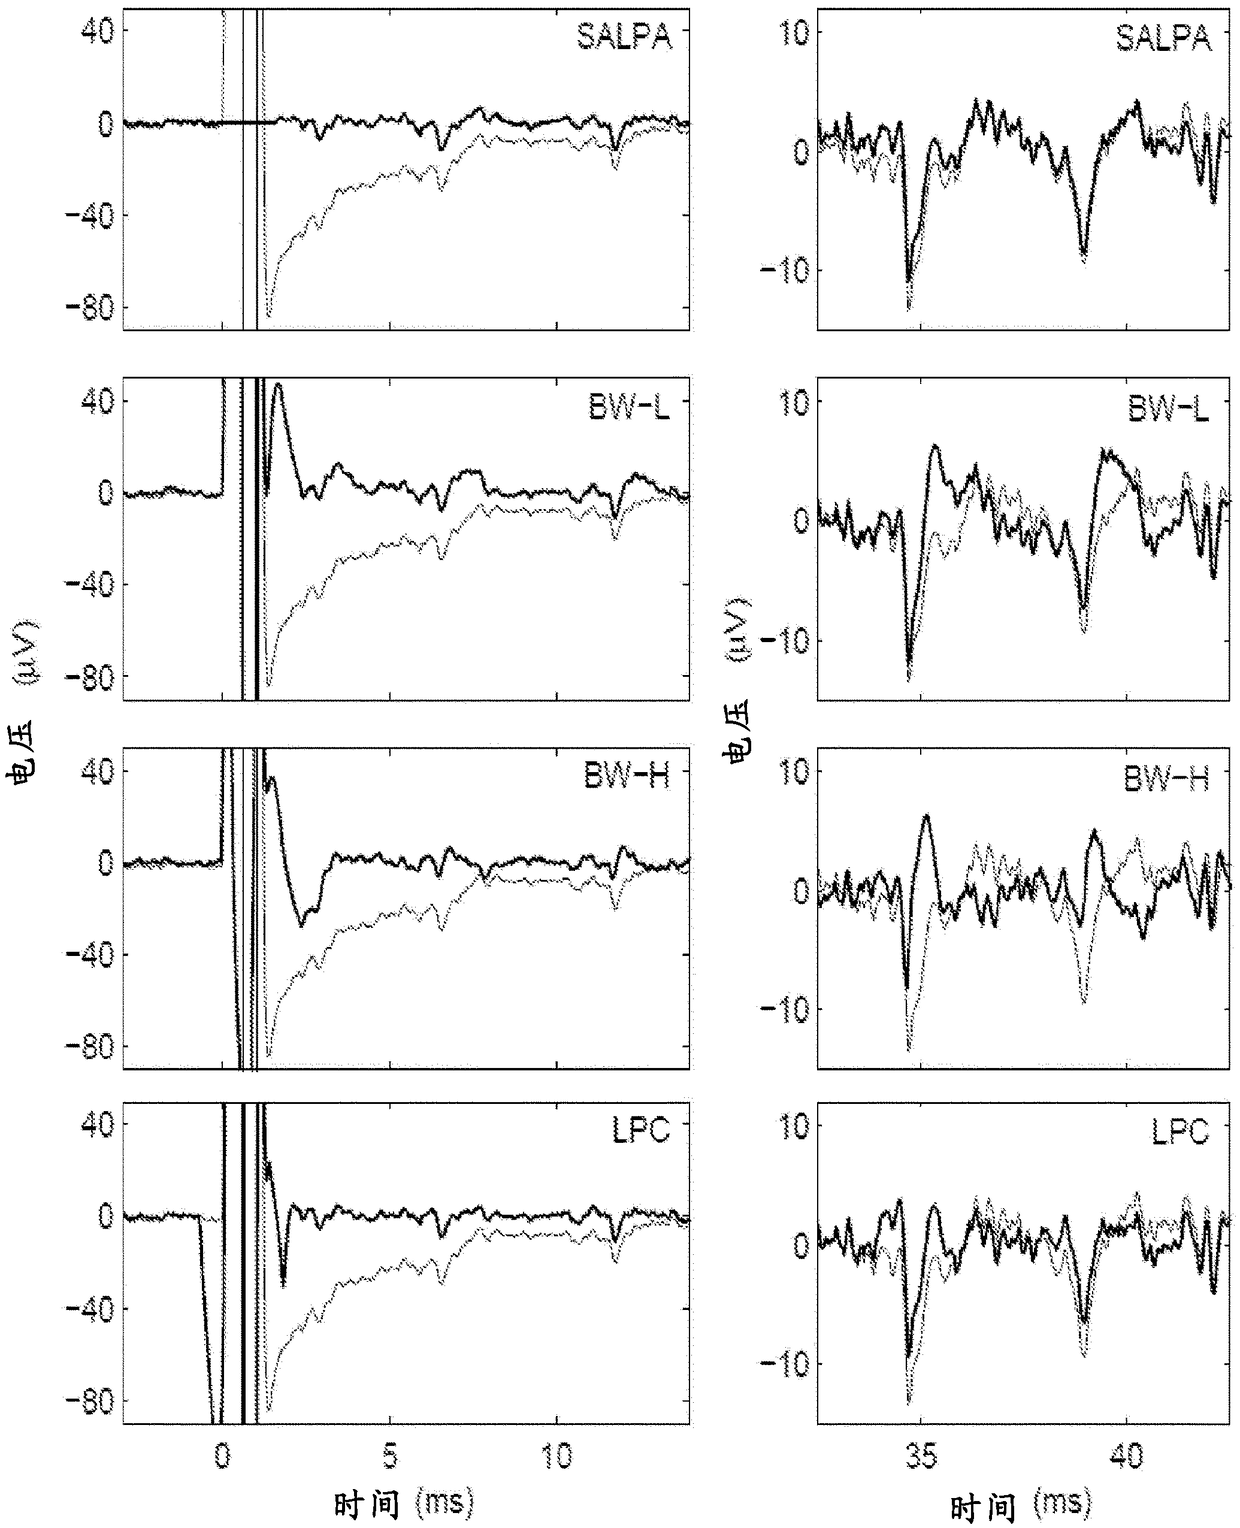 Systems and methods for reducing noise caused by stimulation artifacts in neural signals received by neuro-modulation devices